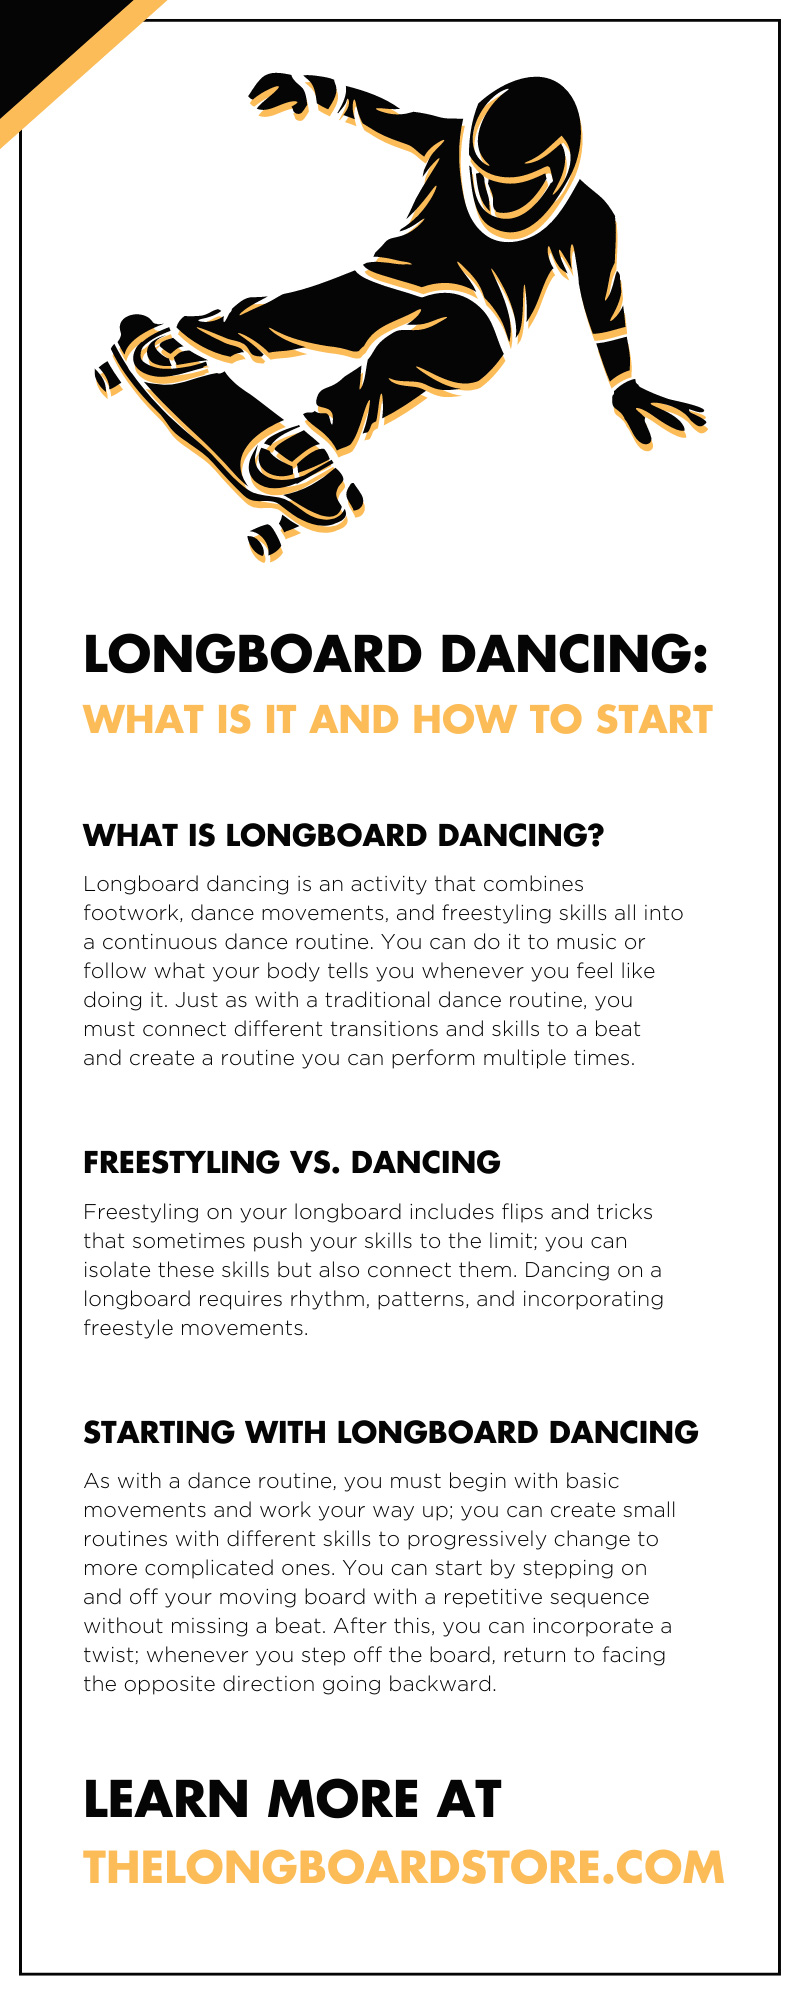 Longboard Dancing: What Is It and How To Start